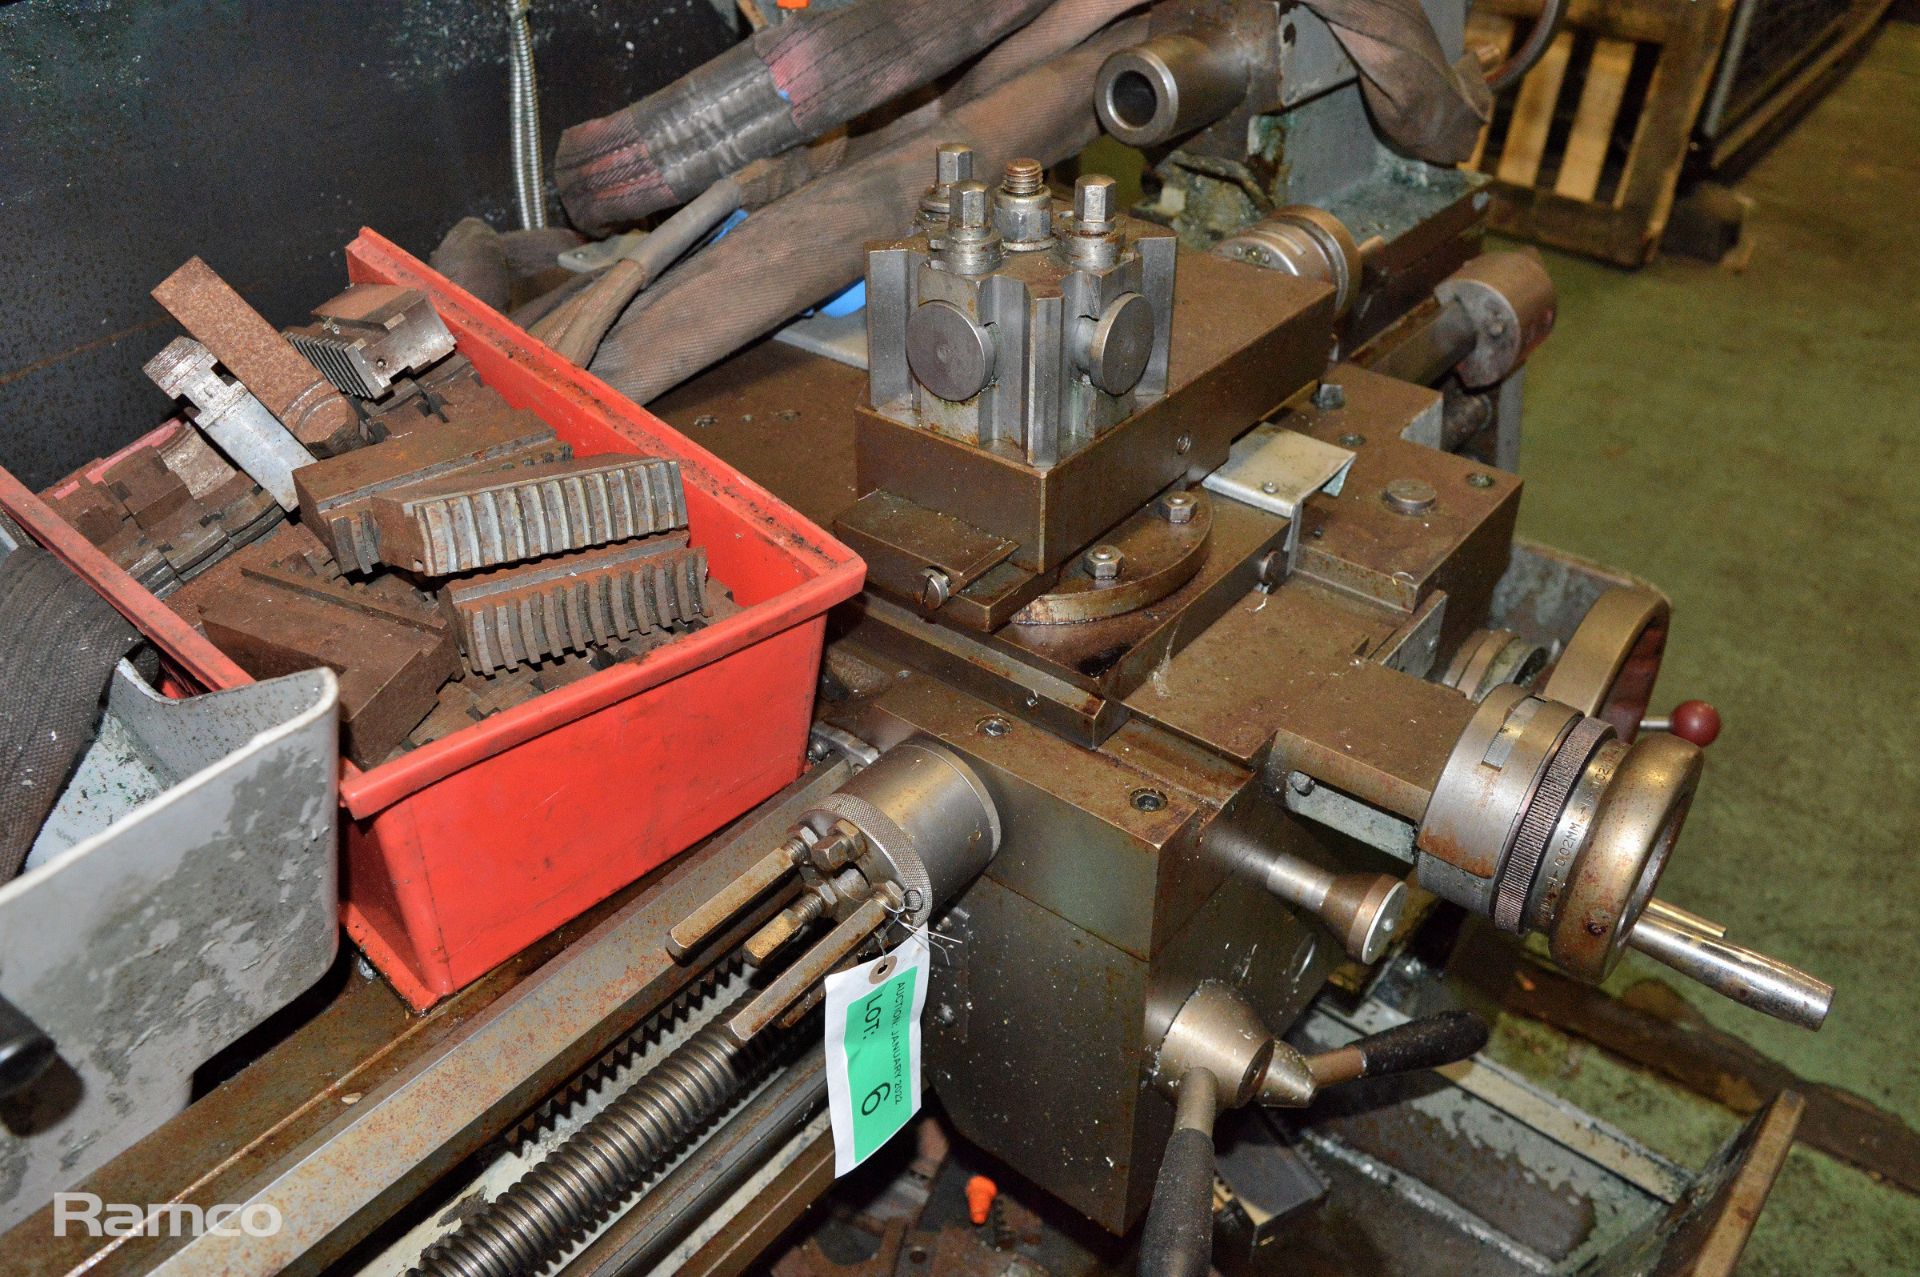 Colchester Triumph 2000 Lathe - 3 Jaw Chuck with teeth, Tail stock, Tool post holder - Image 5 of 11